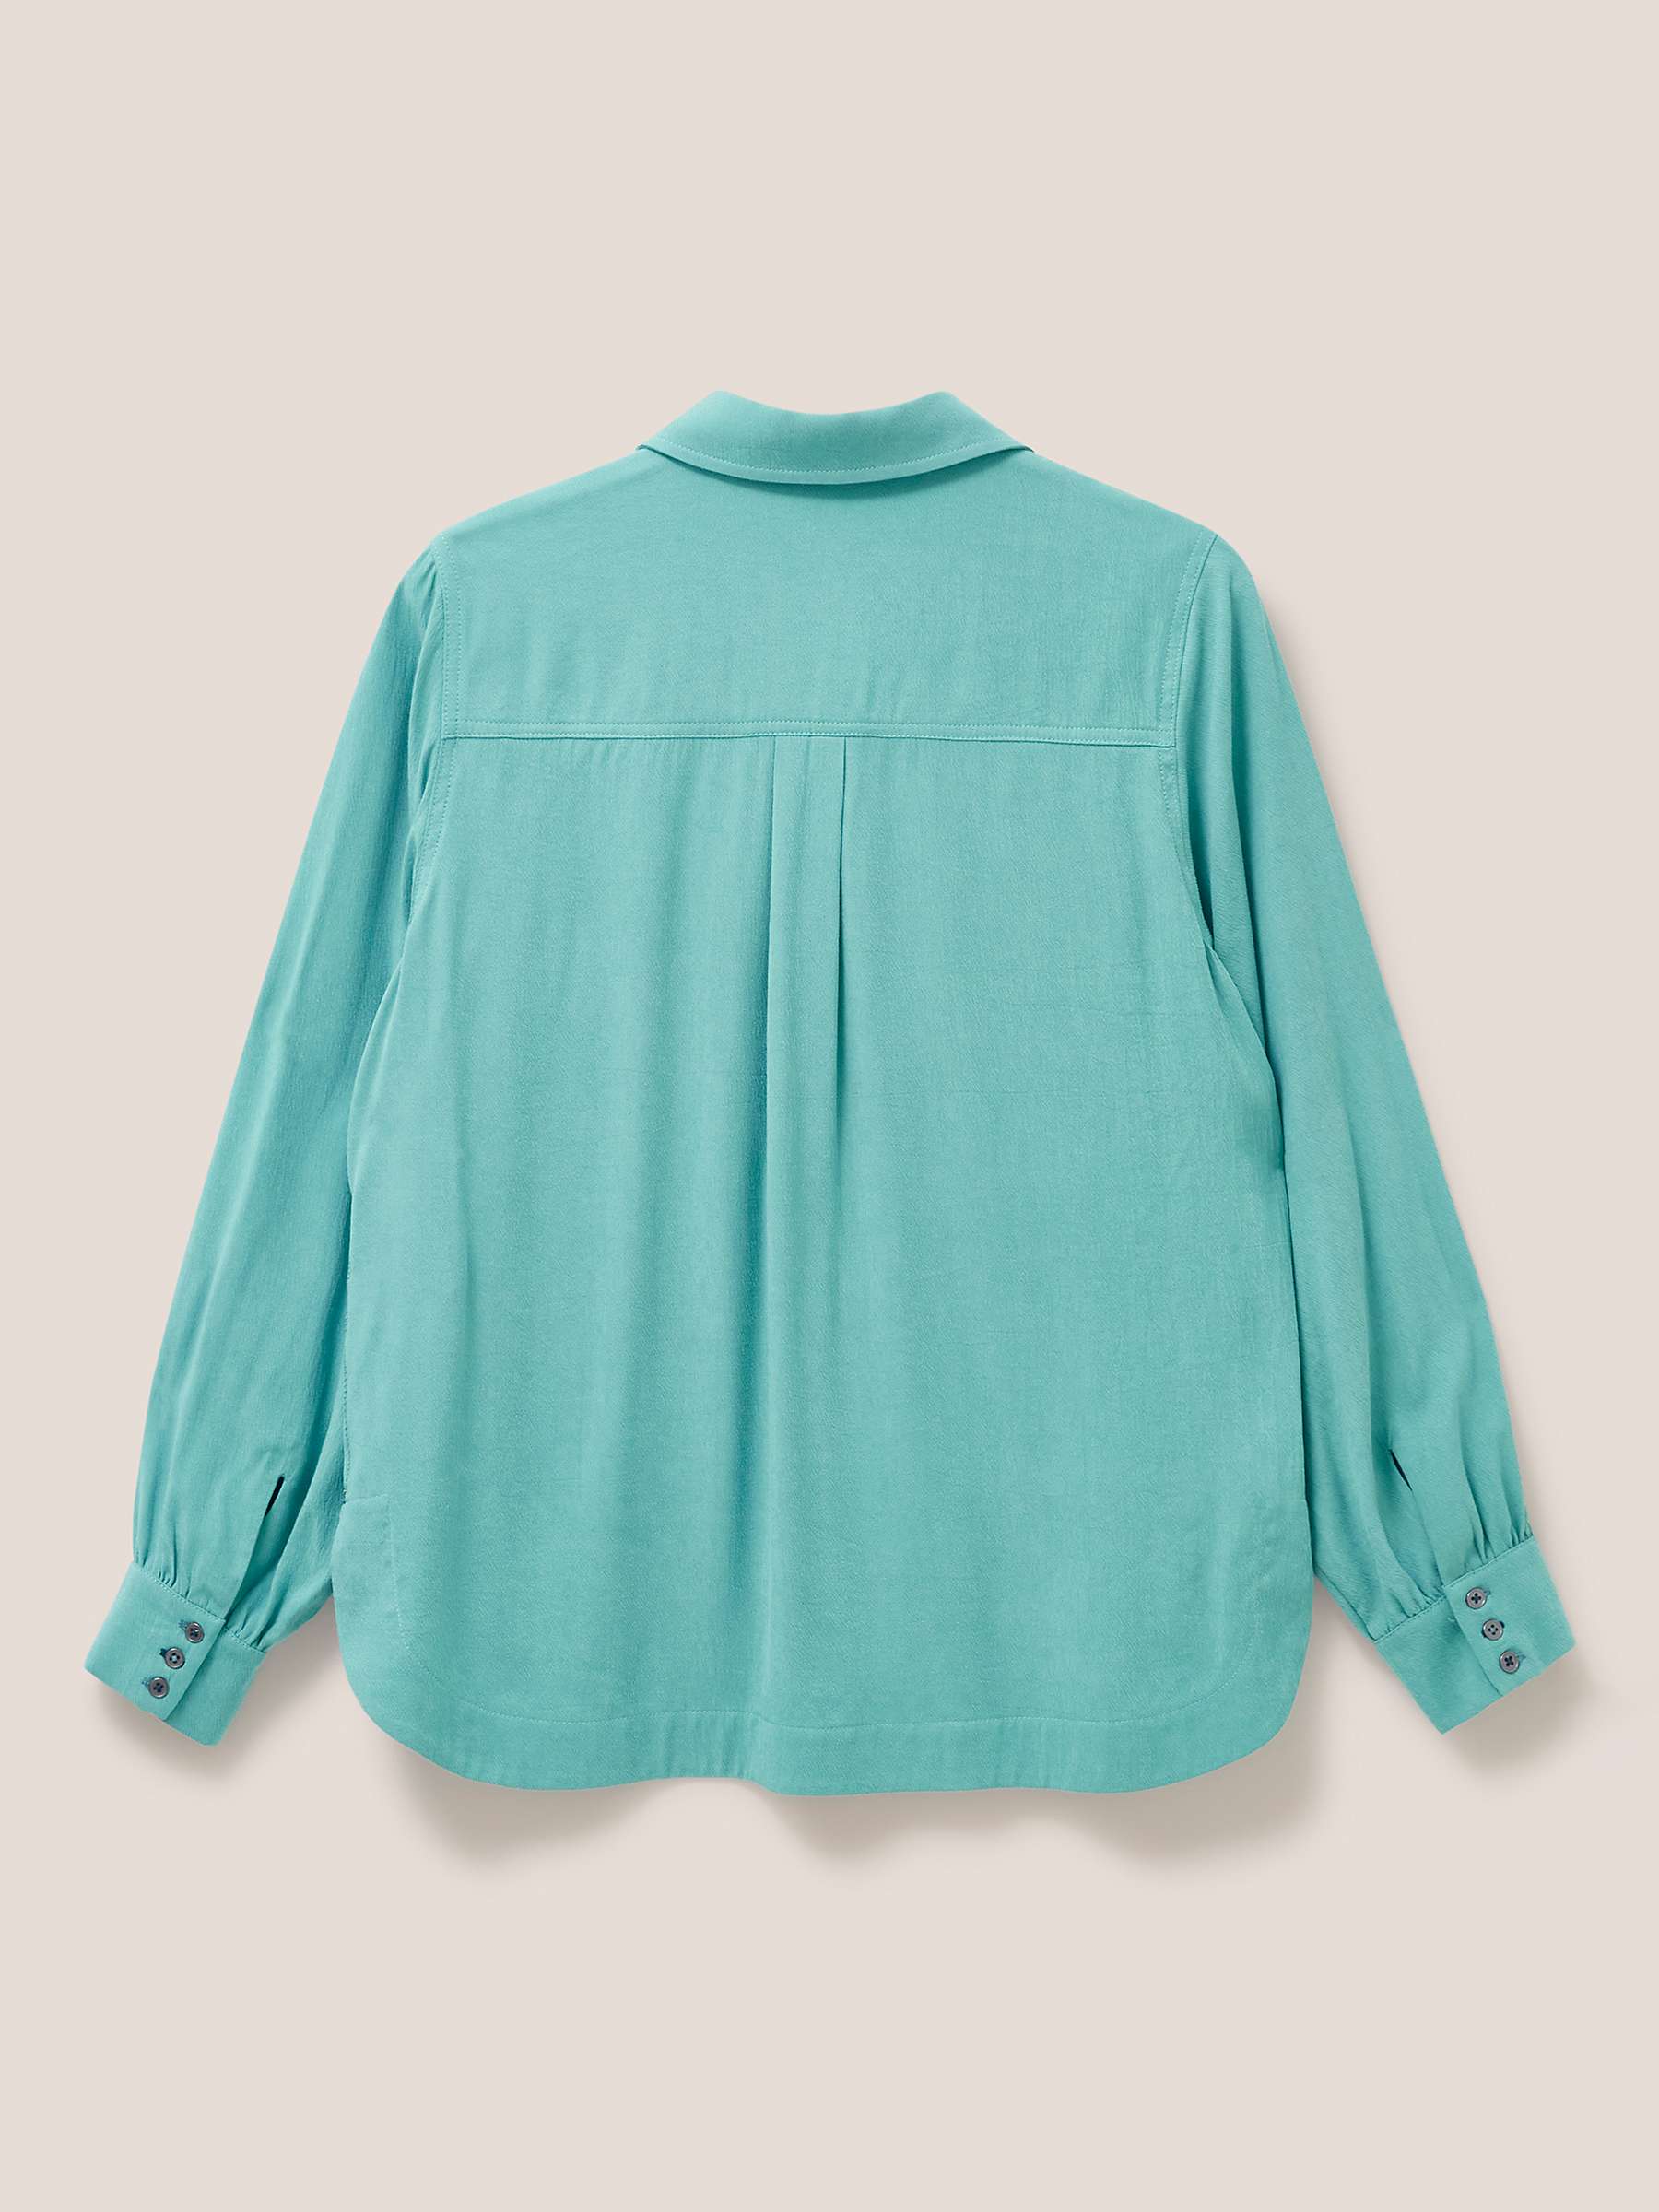 Buy White Stuff Ella Relaxed Fit Shirt Online at johnlewis.com